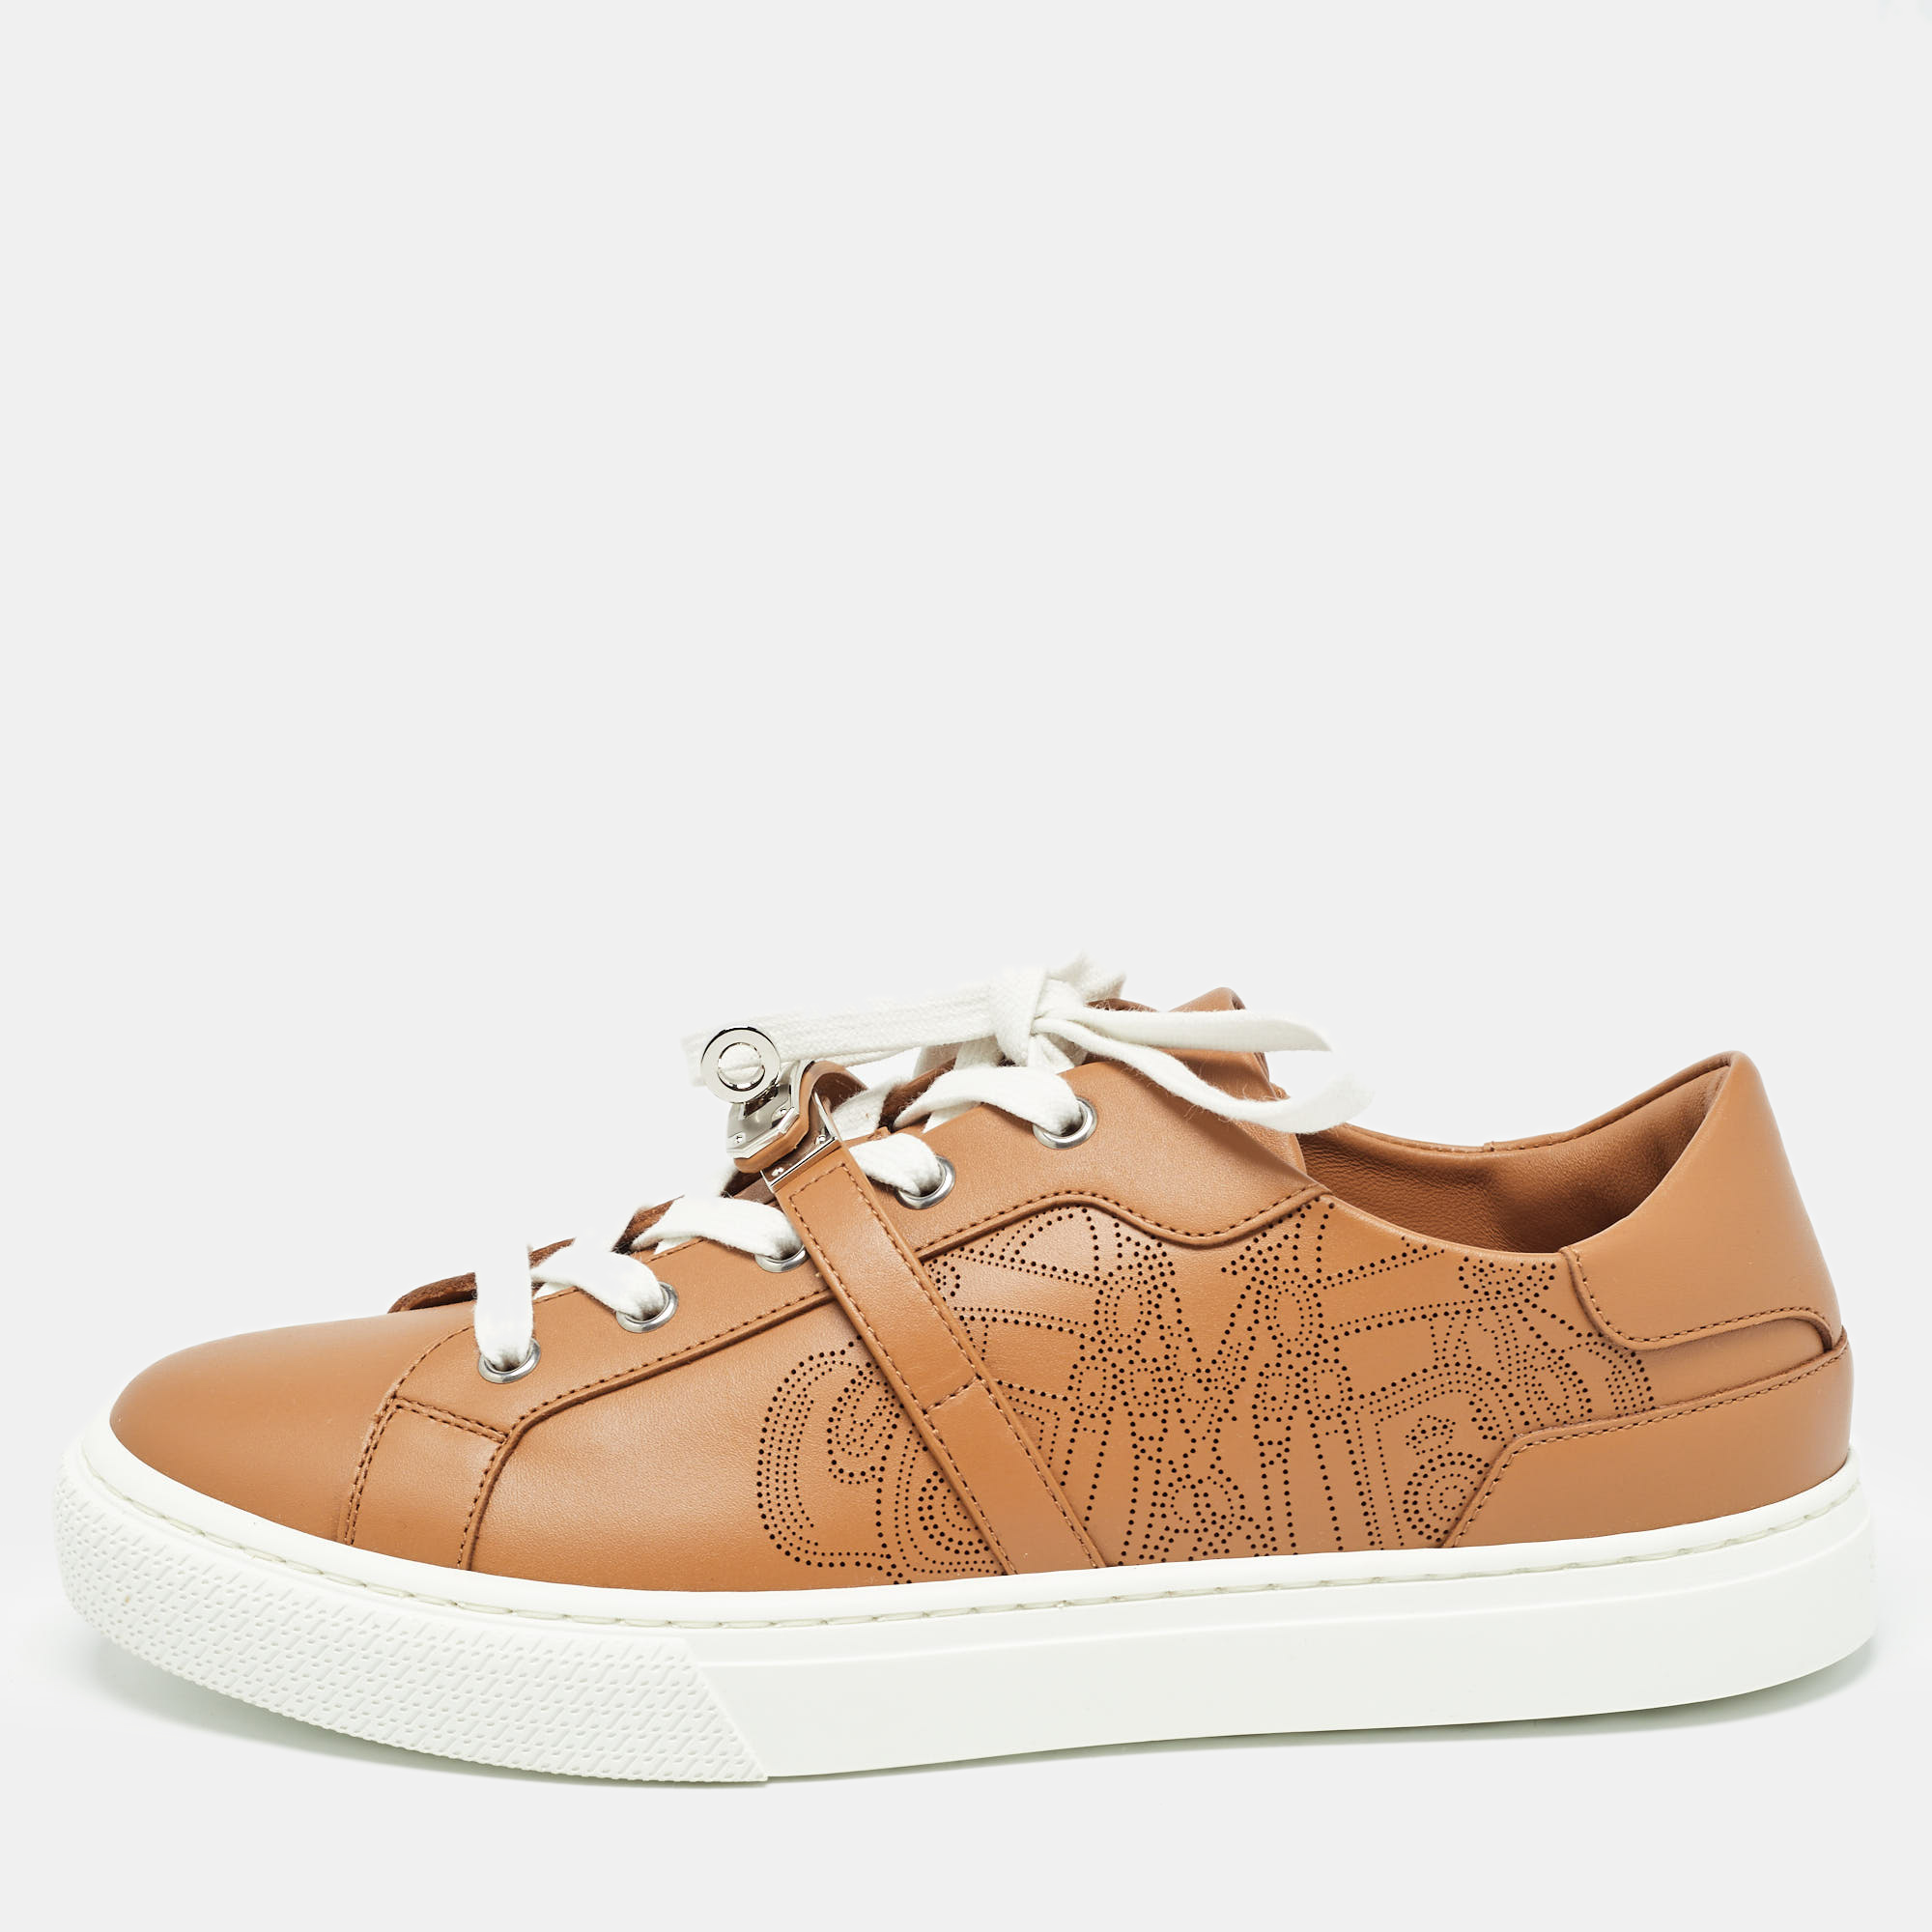 Hermes herm&egrave;s brown leather day low top sneakers size 39